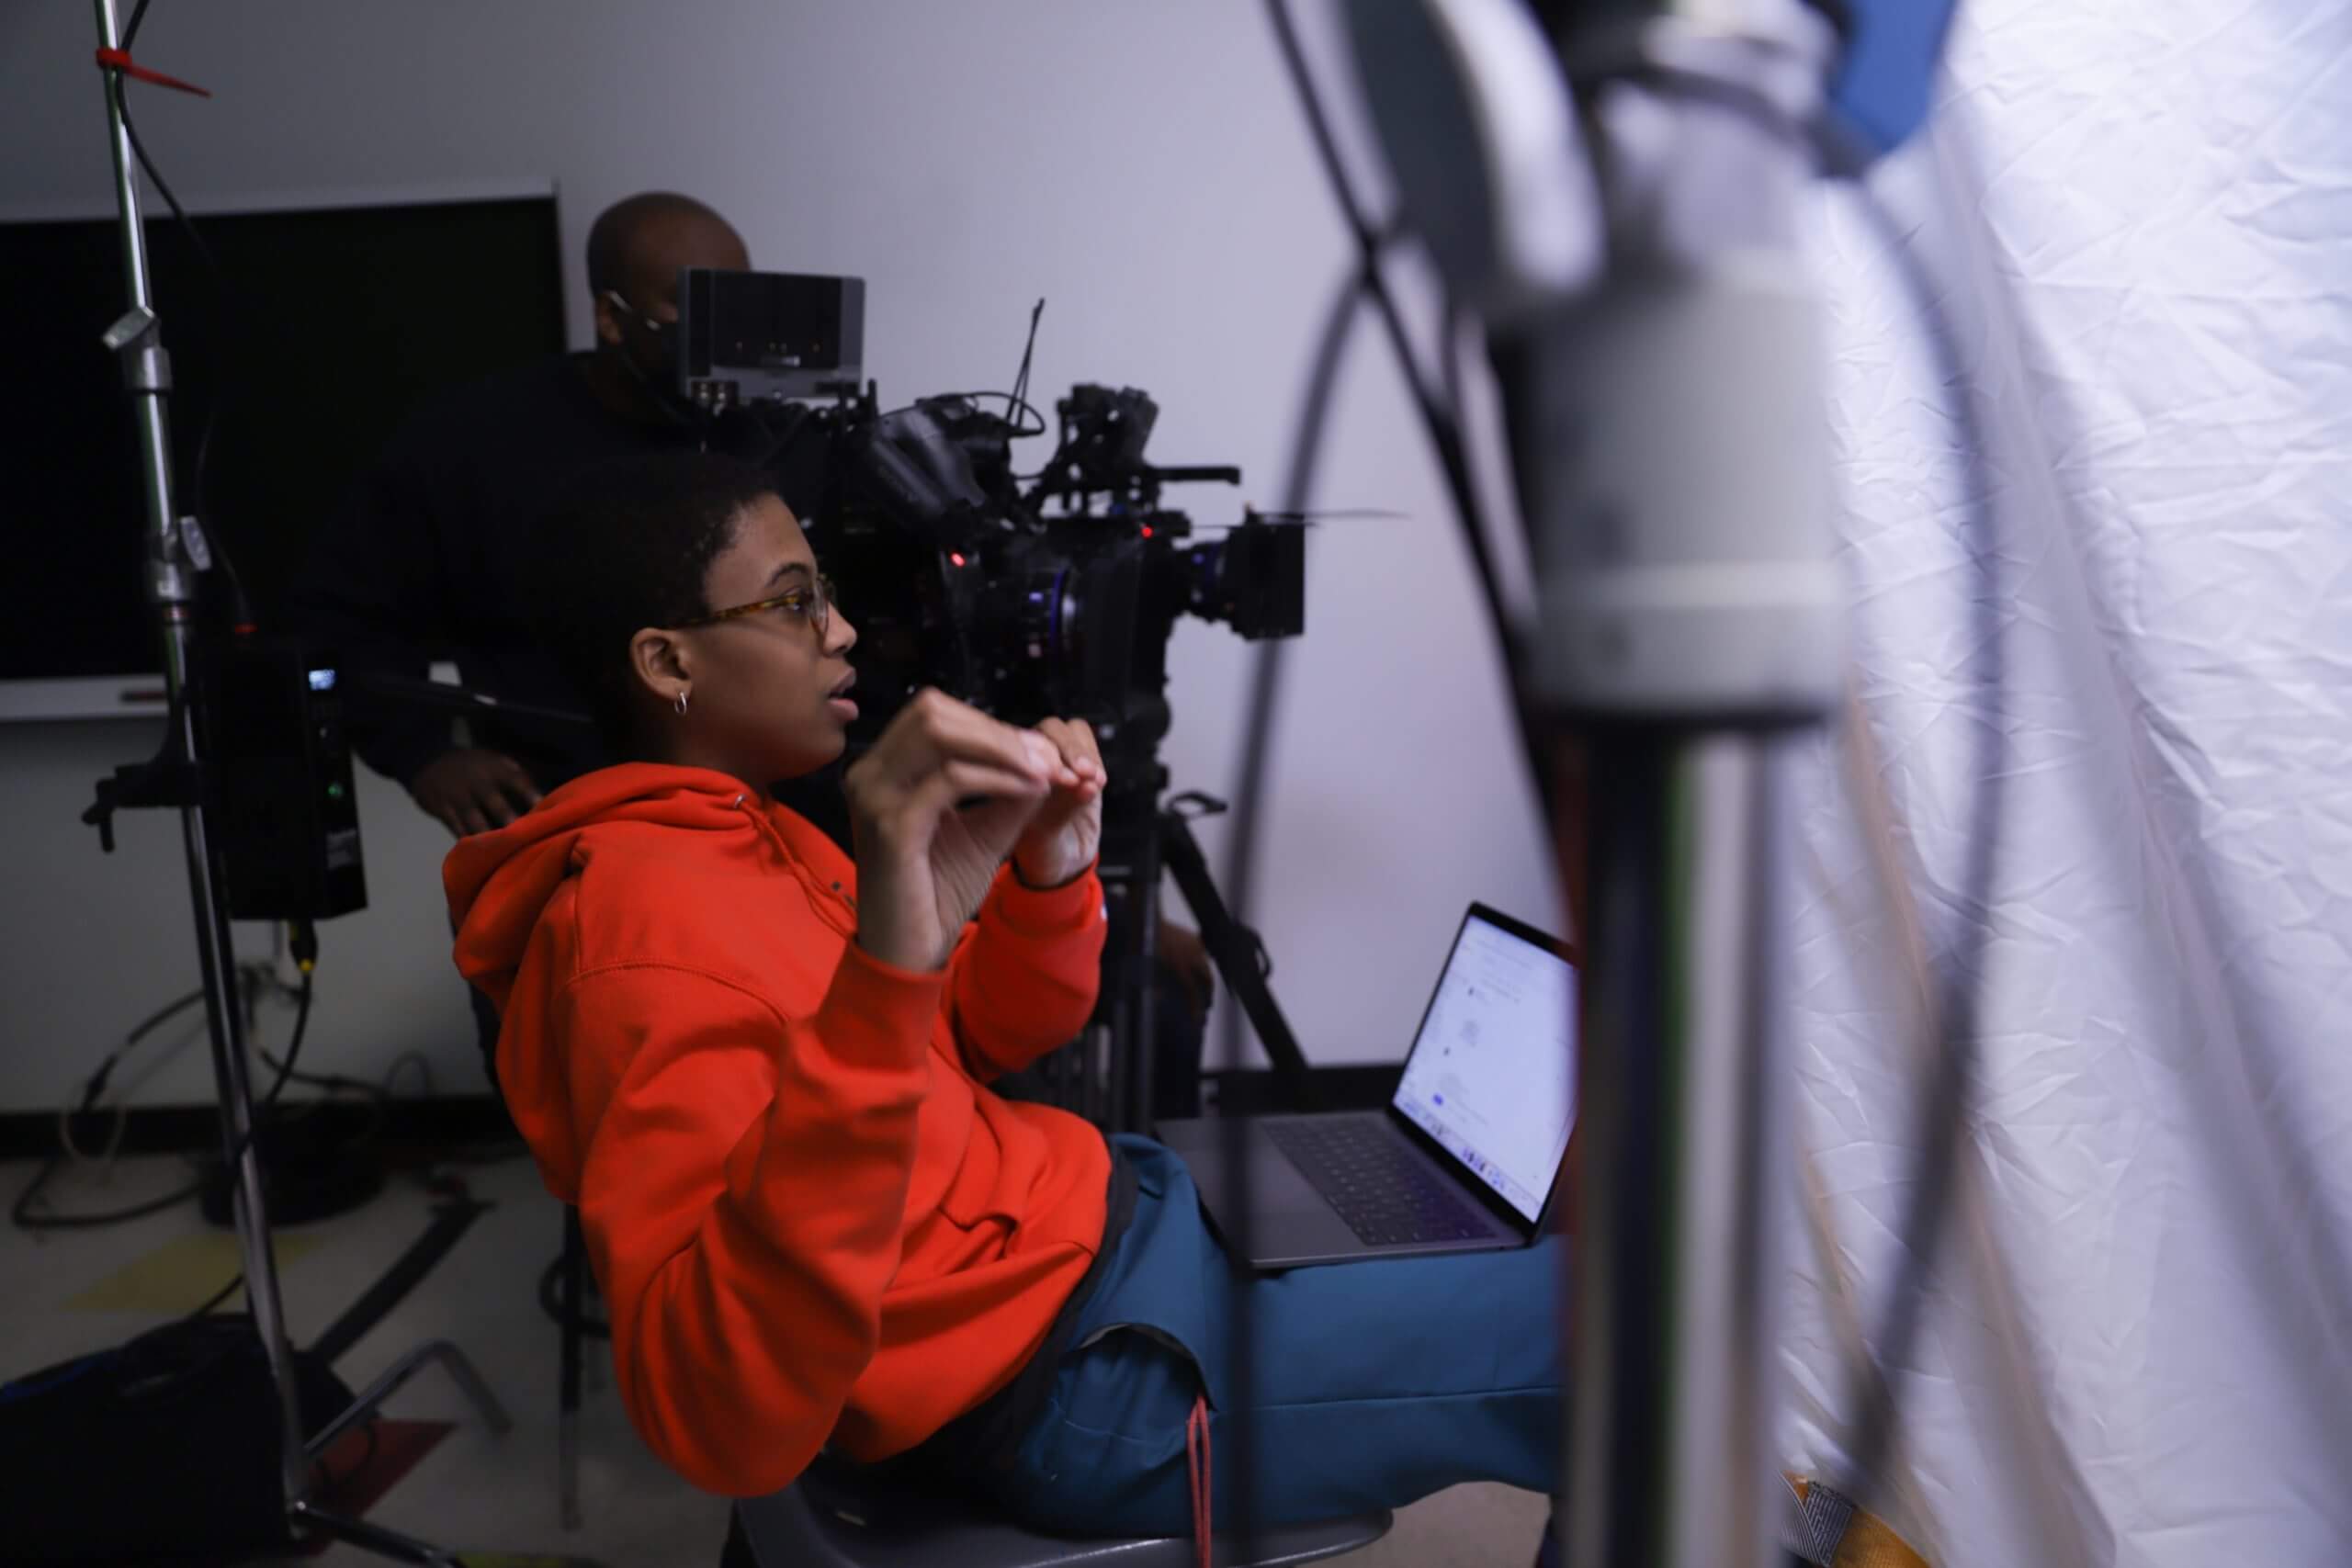 Cai Thomas in a production set. Cai is sitting on a chair, she has a computer on her lap, she is giving instructions, and is moving her hands. Behind her, there is a man with video equipment.